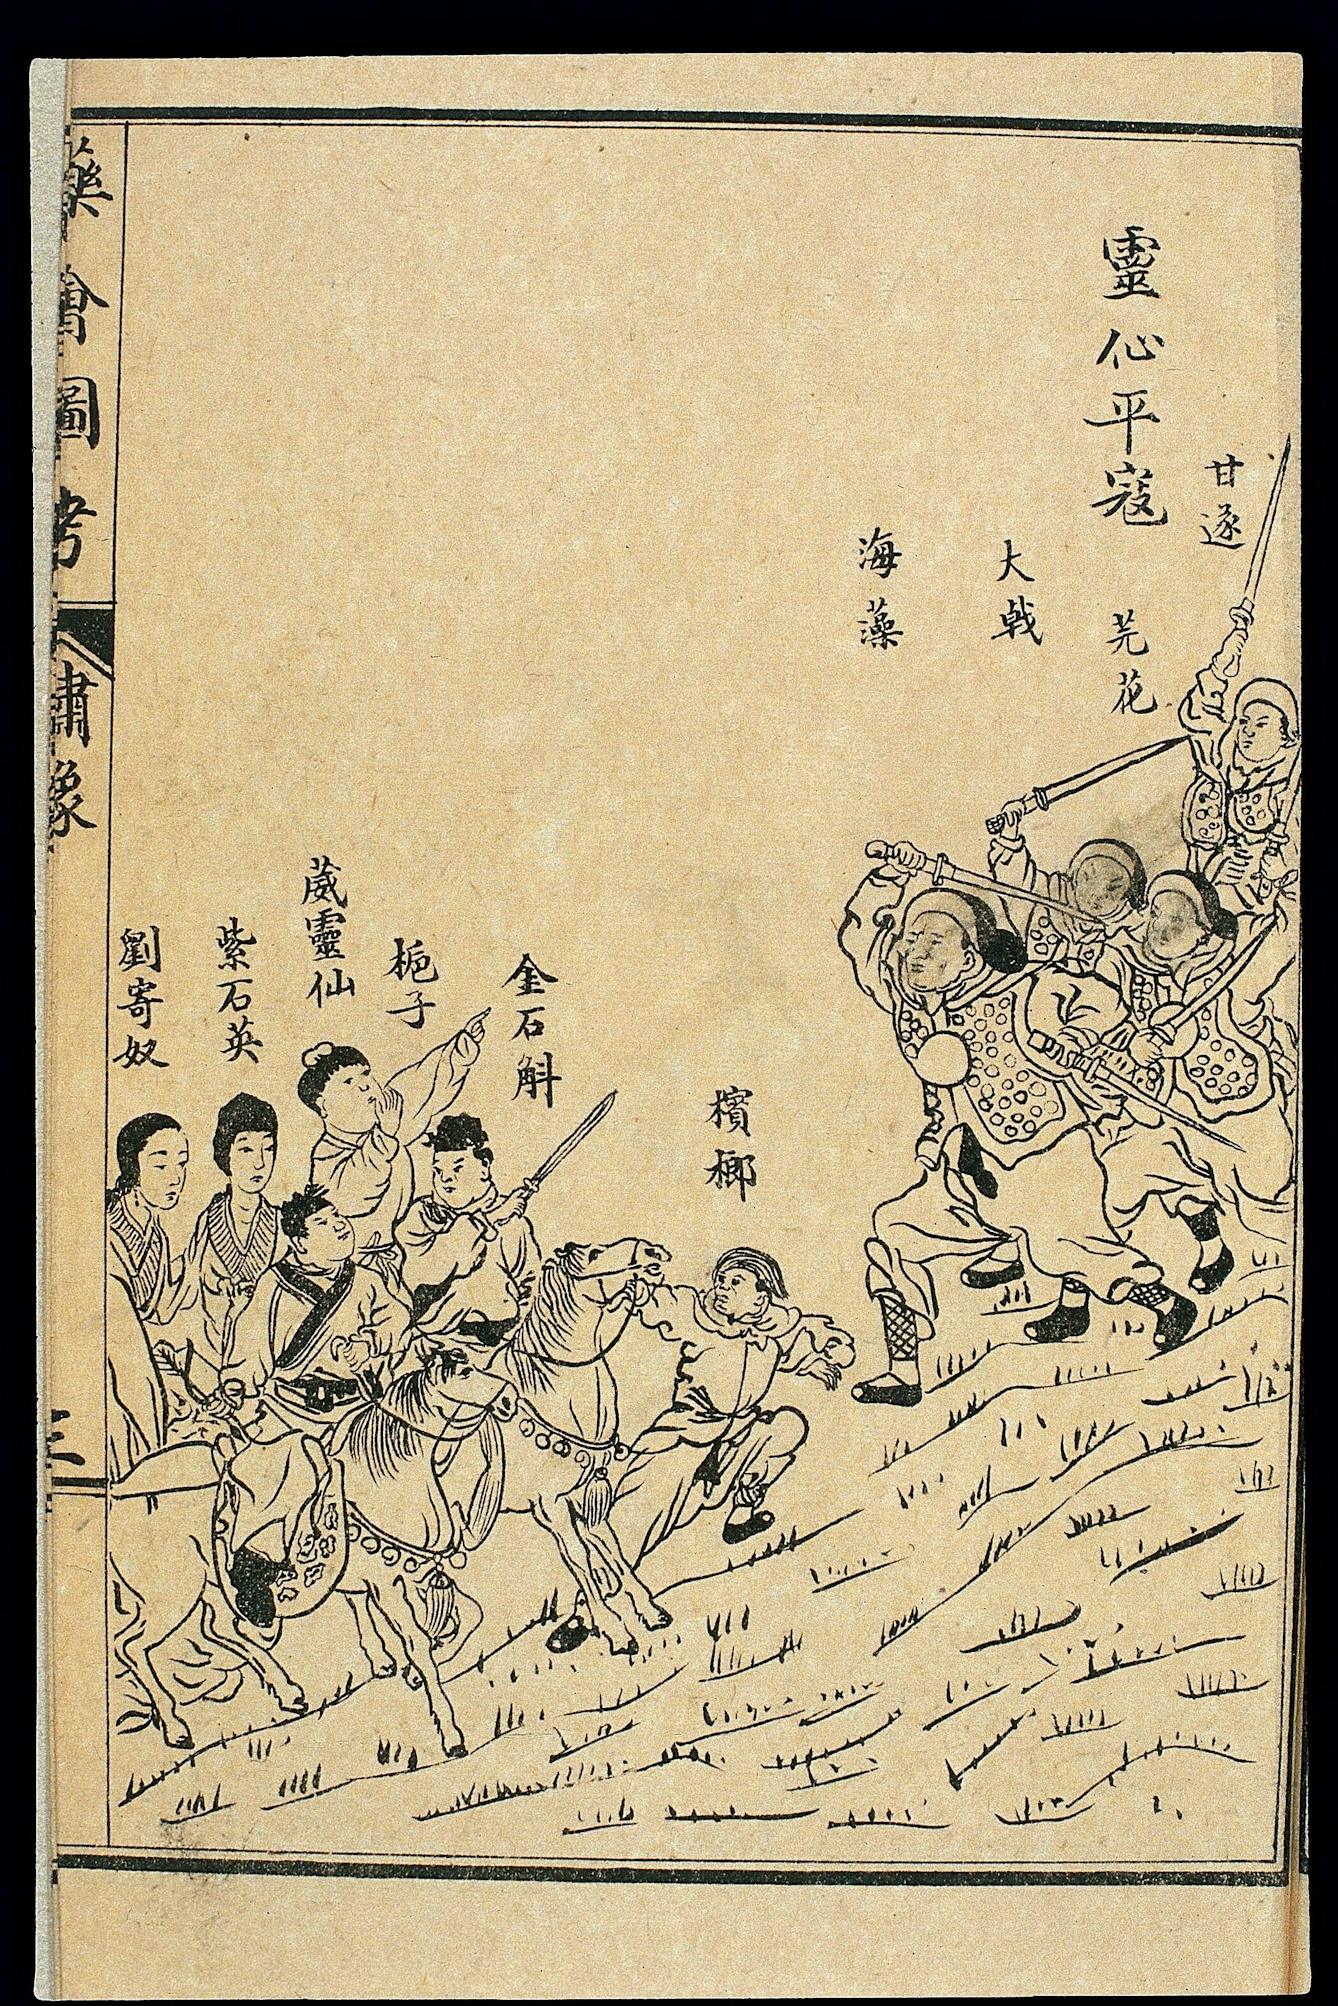 Lithographic depiction of a dramatic scene showing two opposing forces about to engage in battle with swords and horse mounted riders. Above the heads of the soldiers is Chinese hanzi.